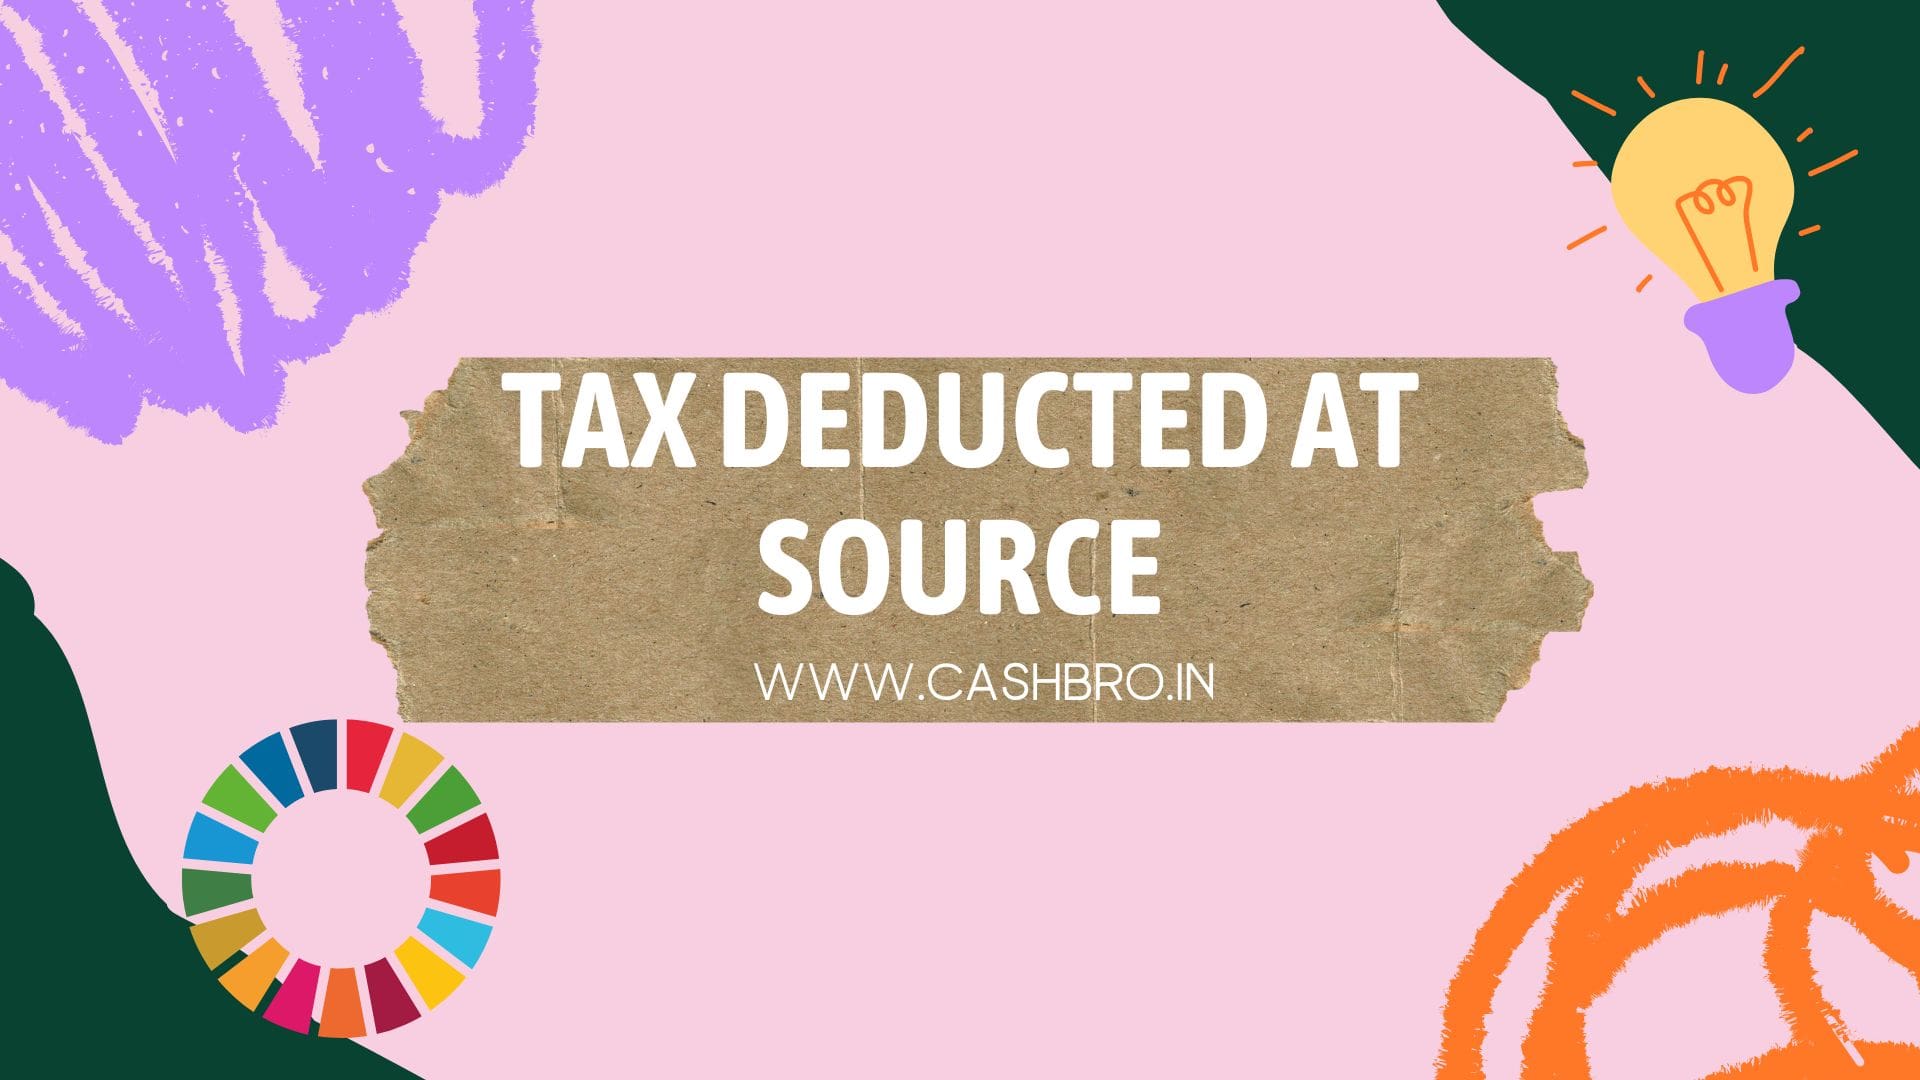 TAX DEDUCTED AT SOURCE